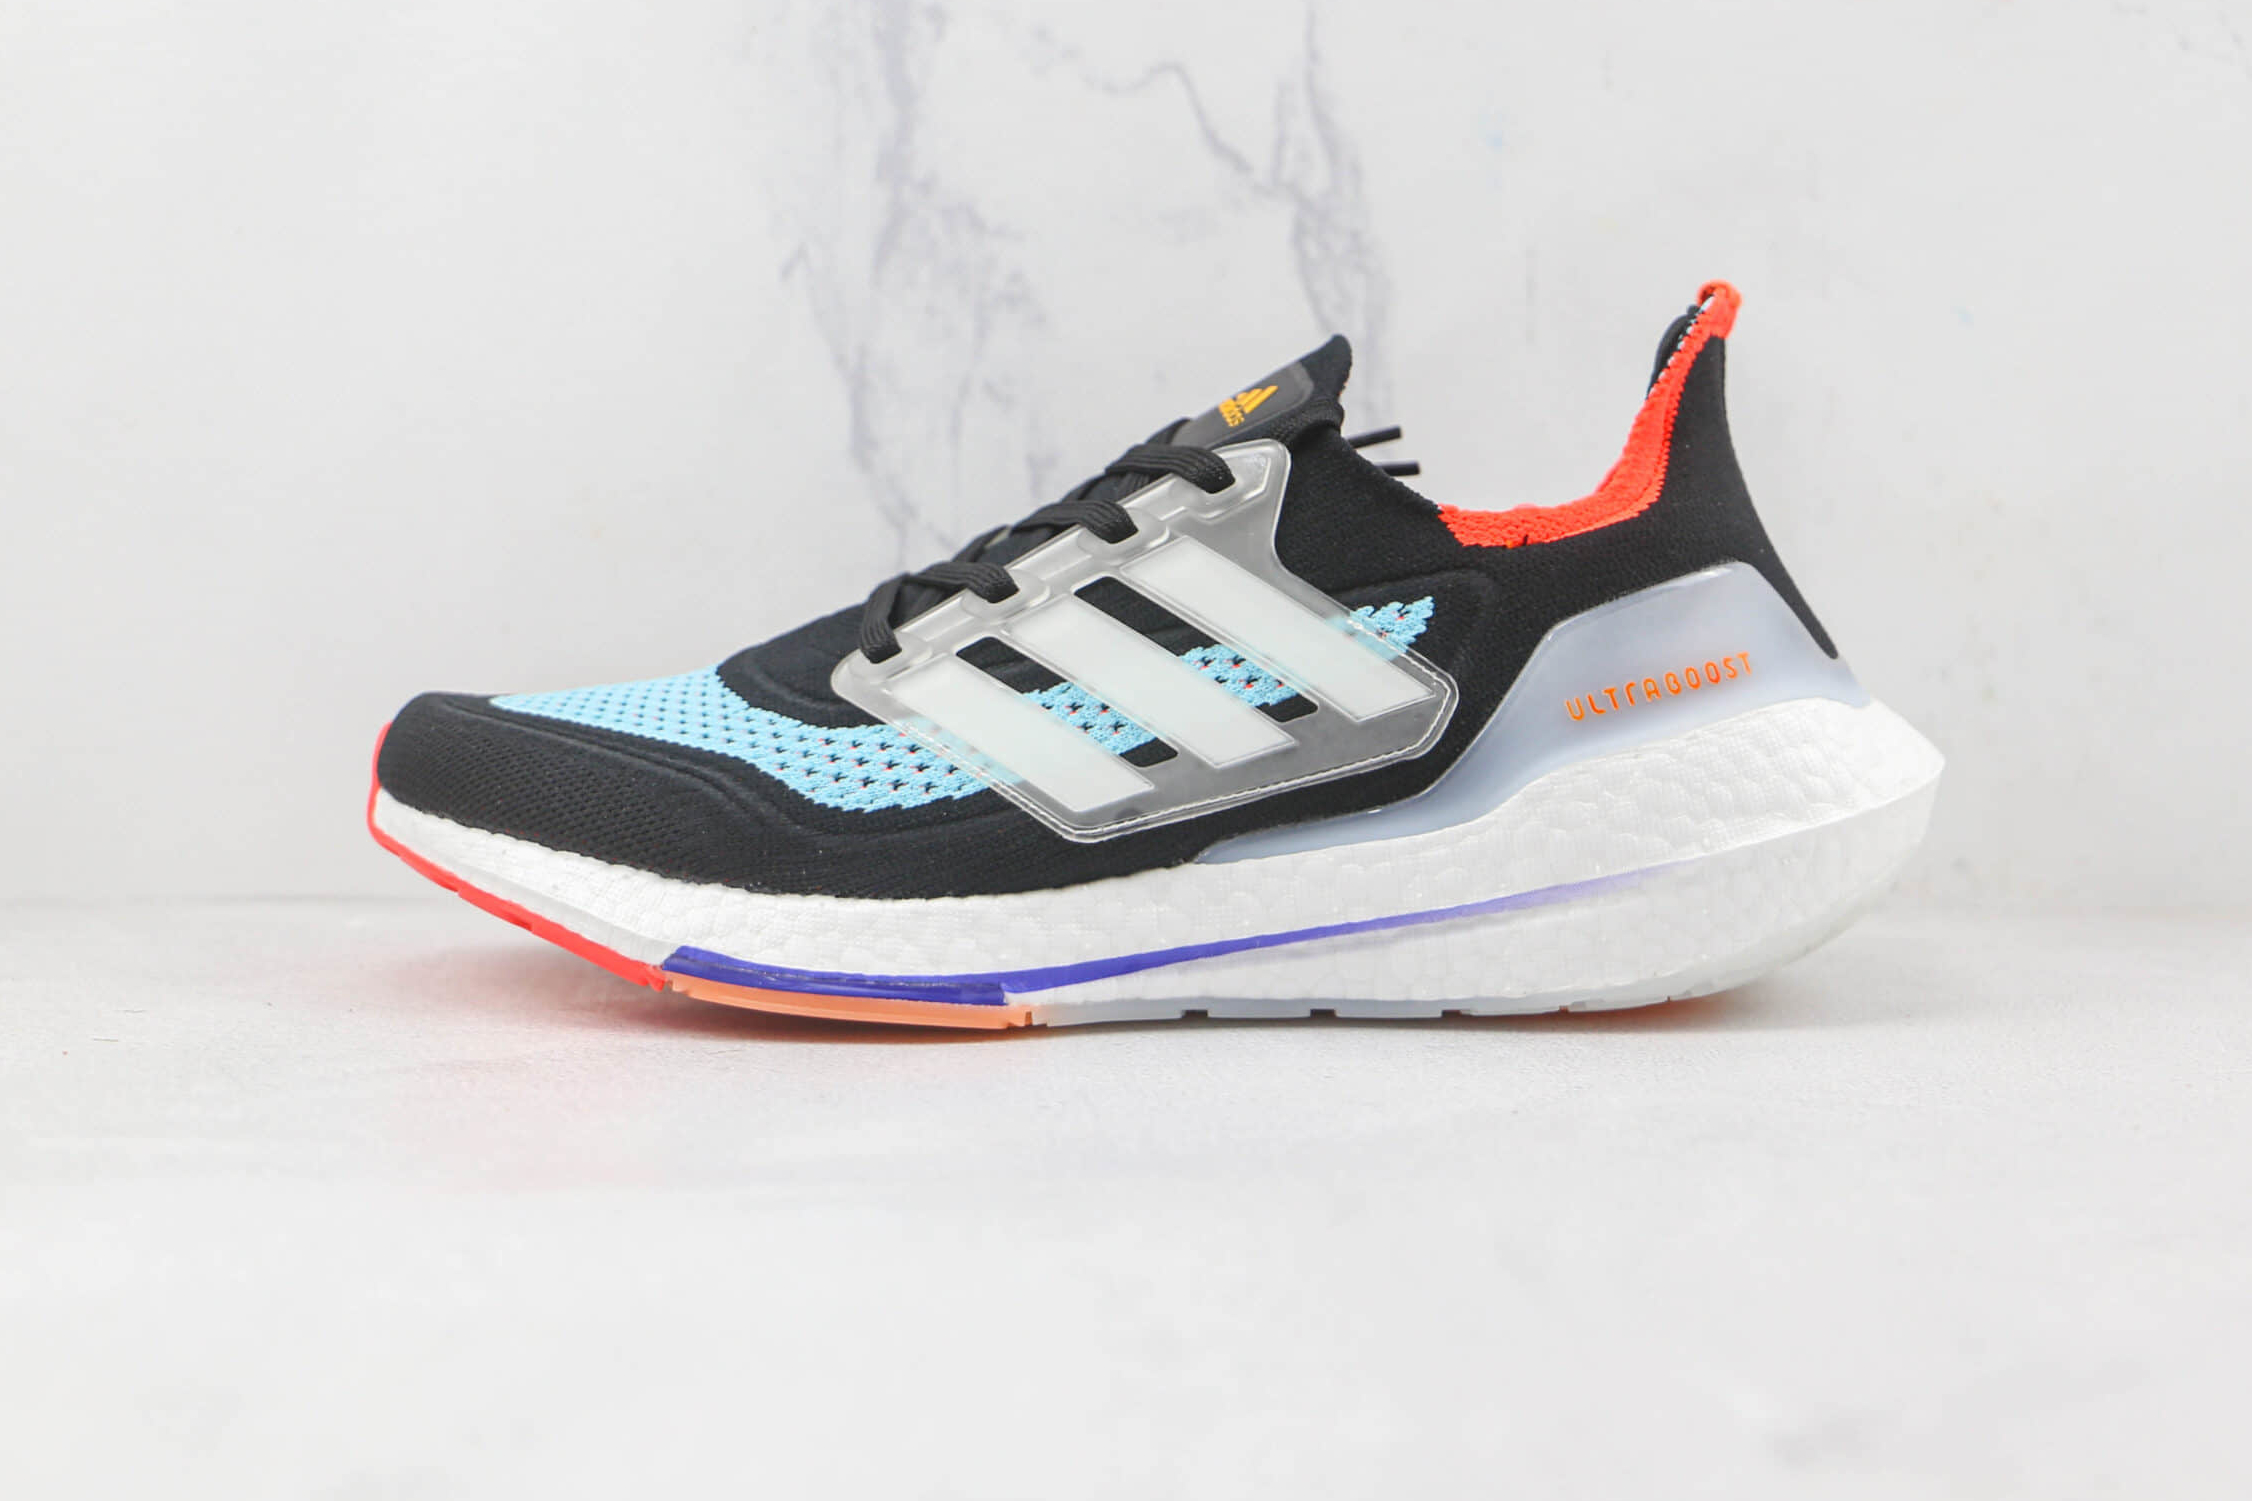 Adidas Ultraboost 21 S23867 | Lightweight and Responsive Boost Shoes